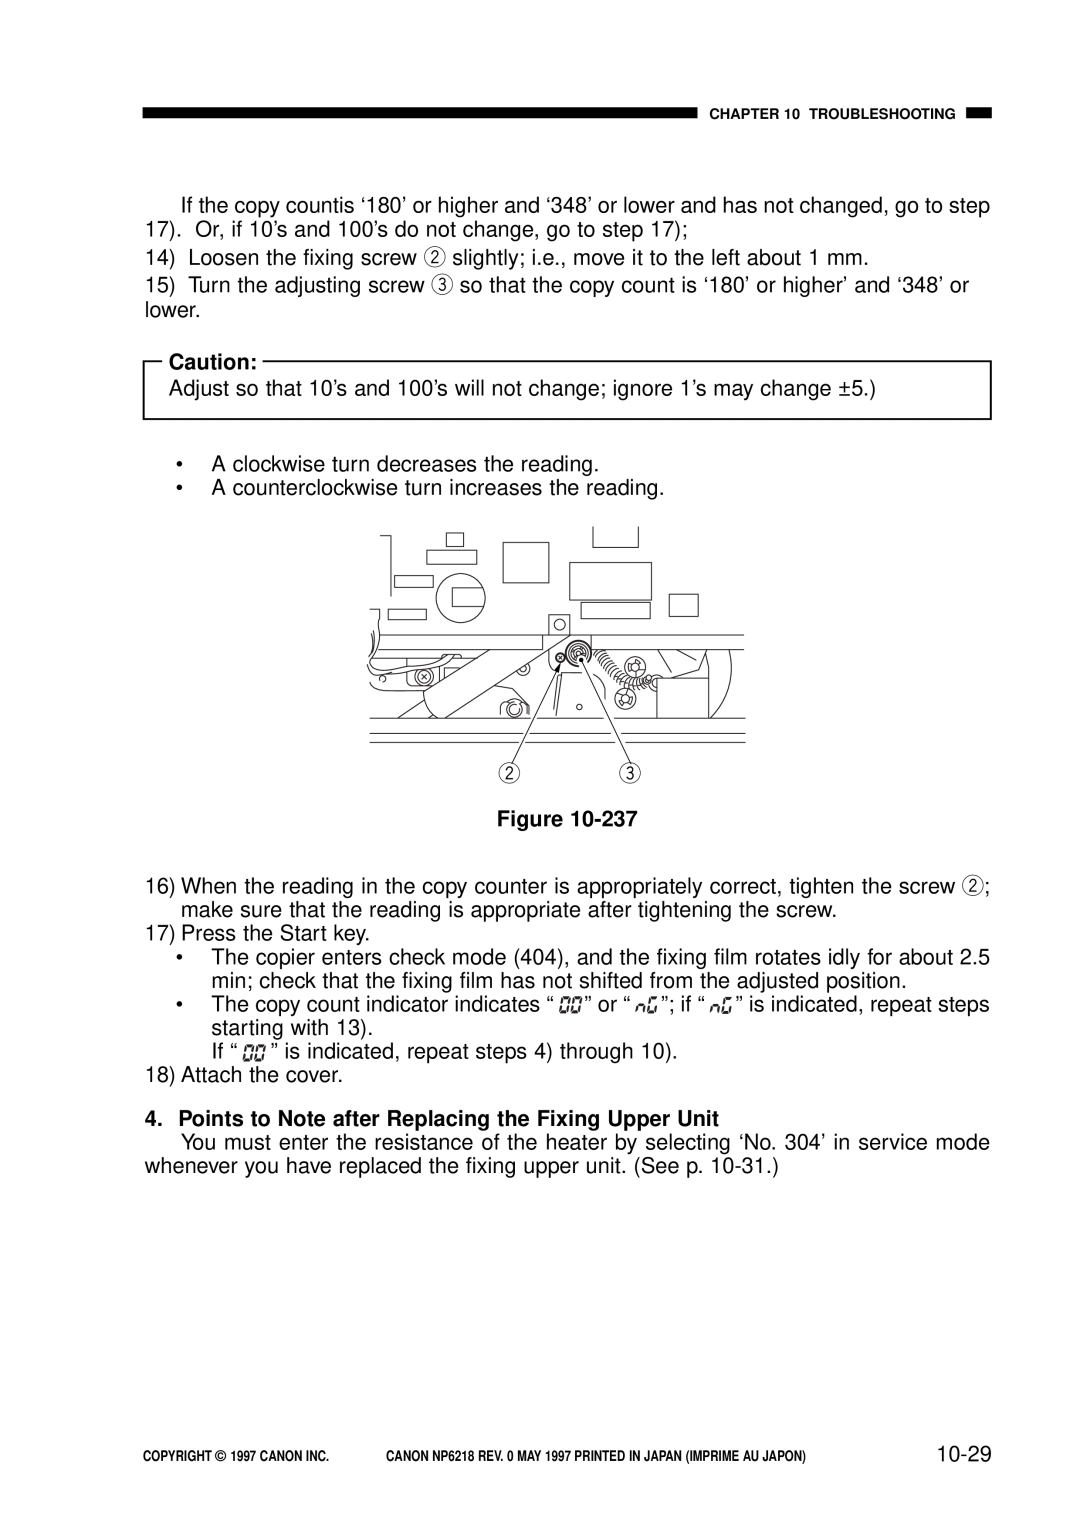 Canon FY8-13EX-000, NP6218 service manual Points to Note after Replacing the Fixing Upper Unit, 10-29 